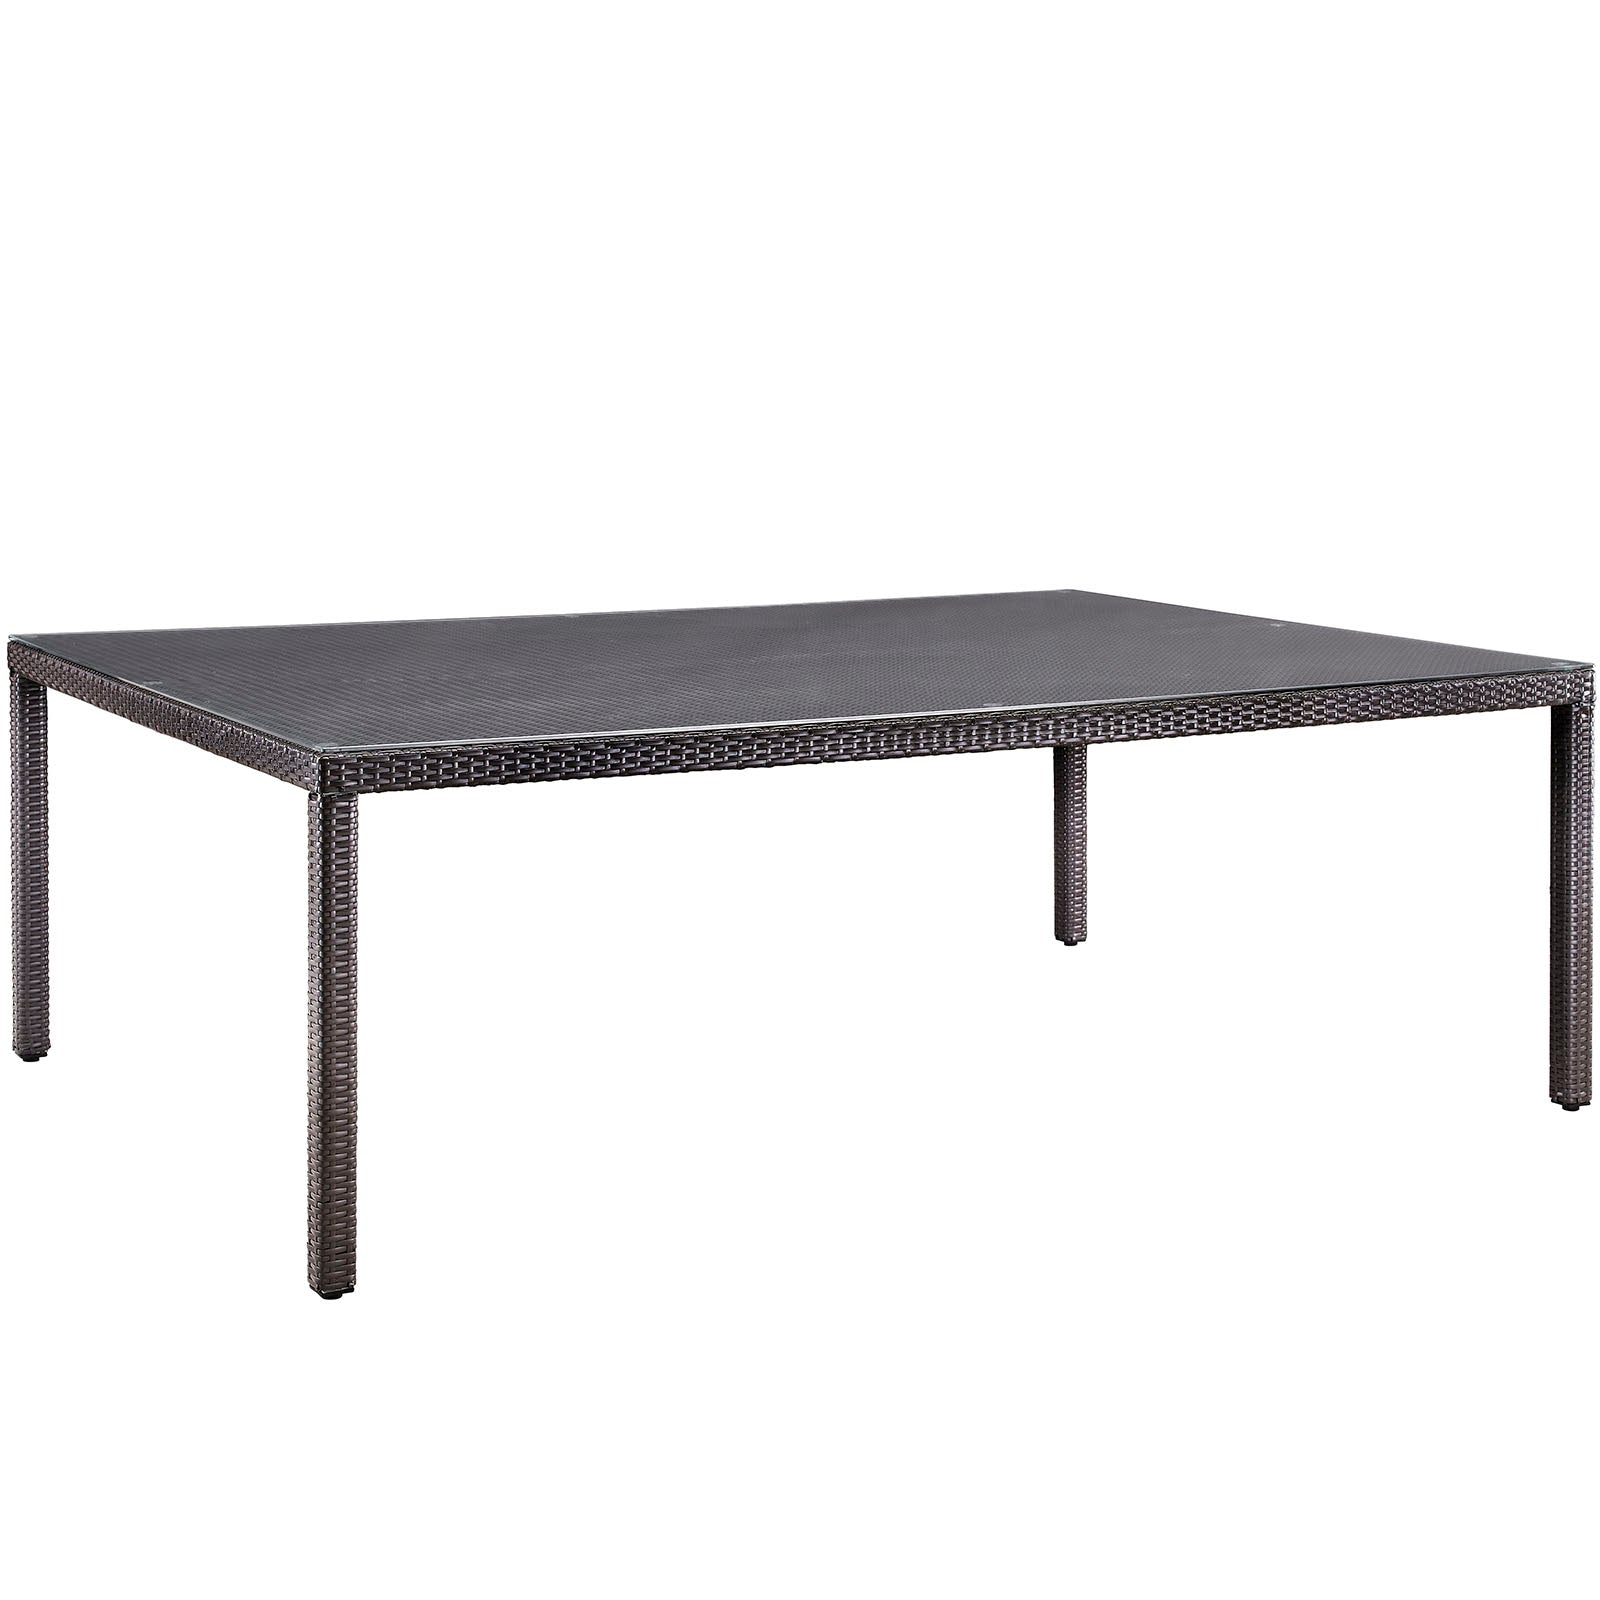 Convene 90" Outdoor Patio Dining Table - East Shore Modern Home Furnishings